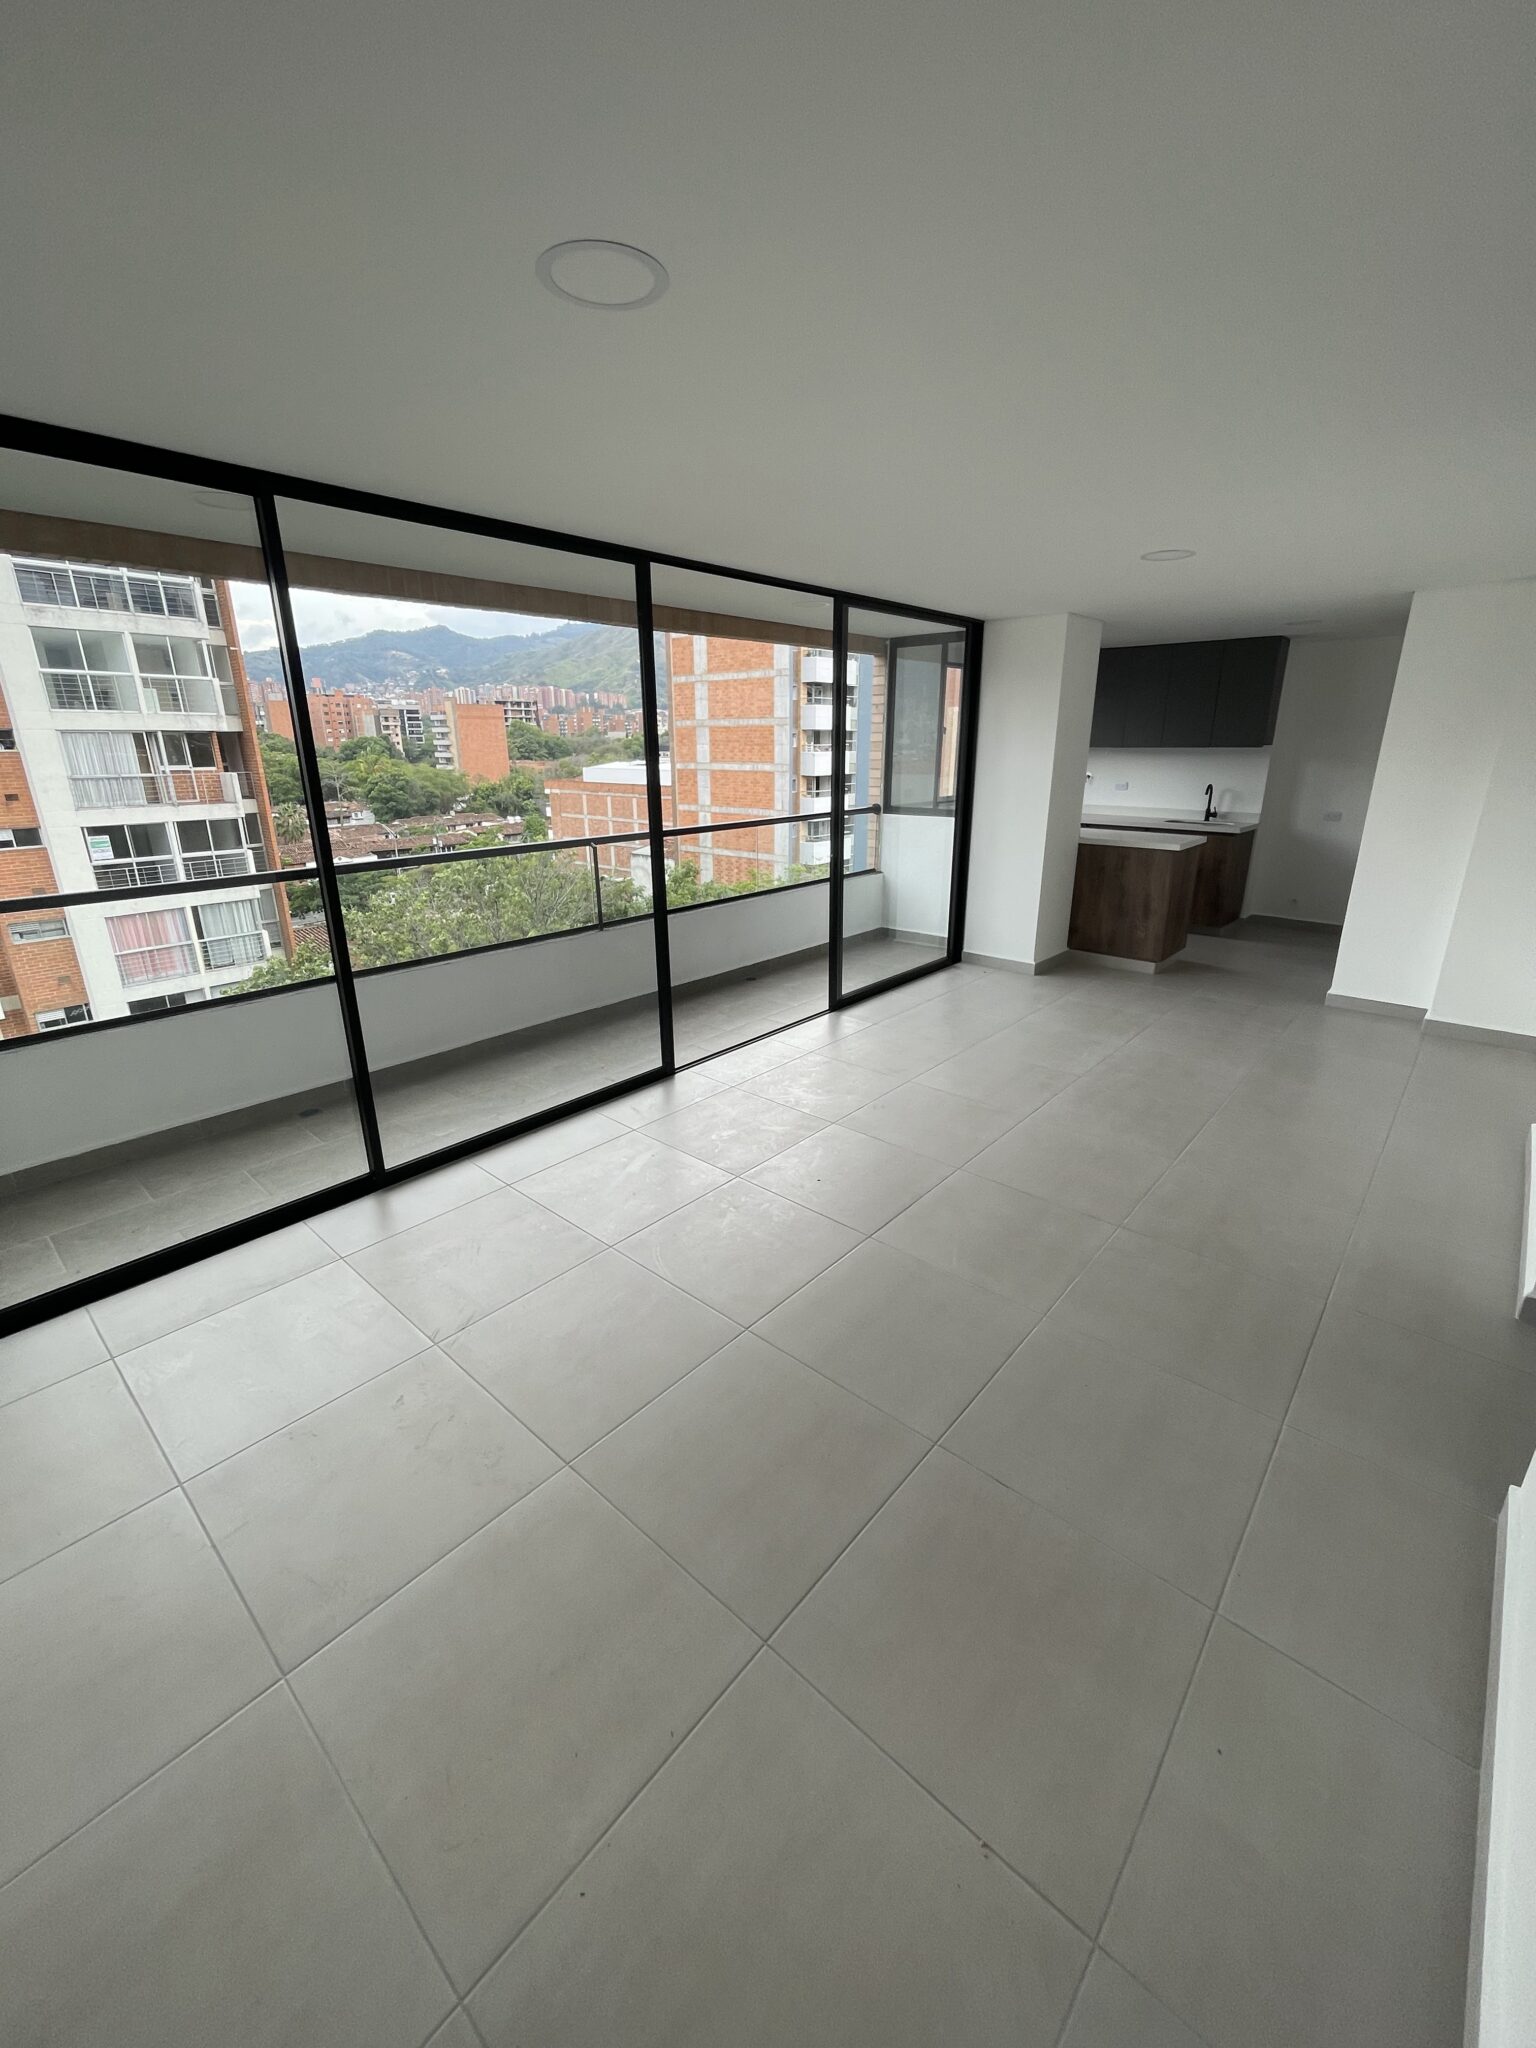 New Construction 3BR Apartment Located In The Heart of Belen With Low Carrying Costs